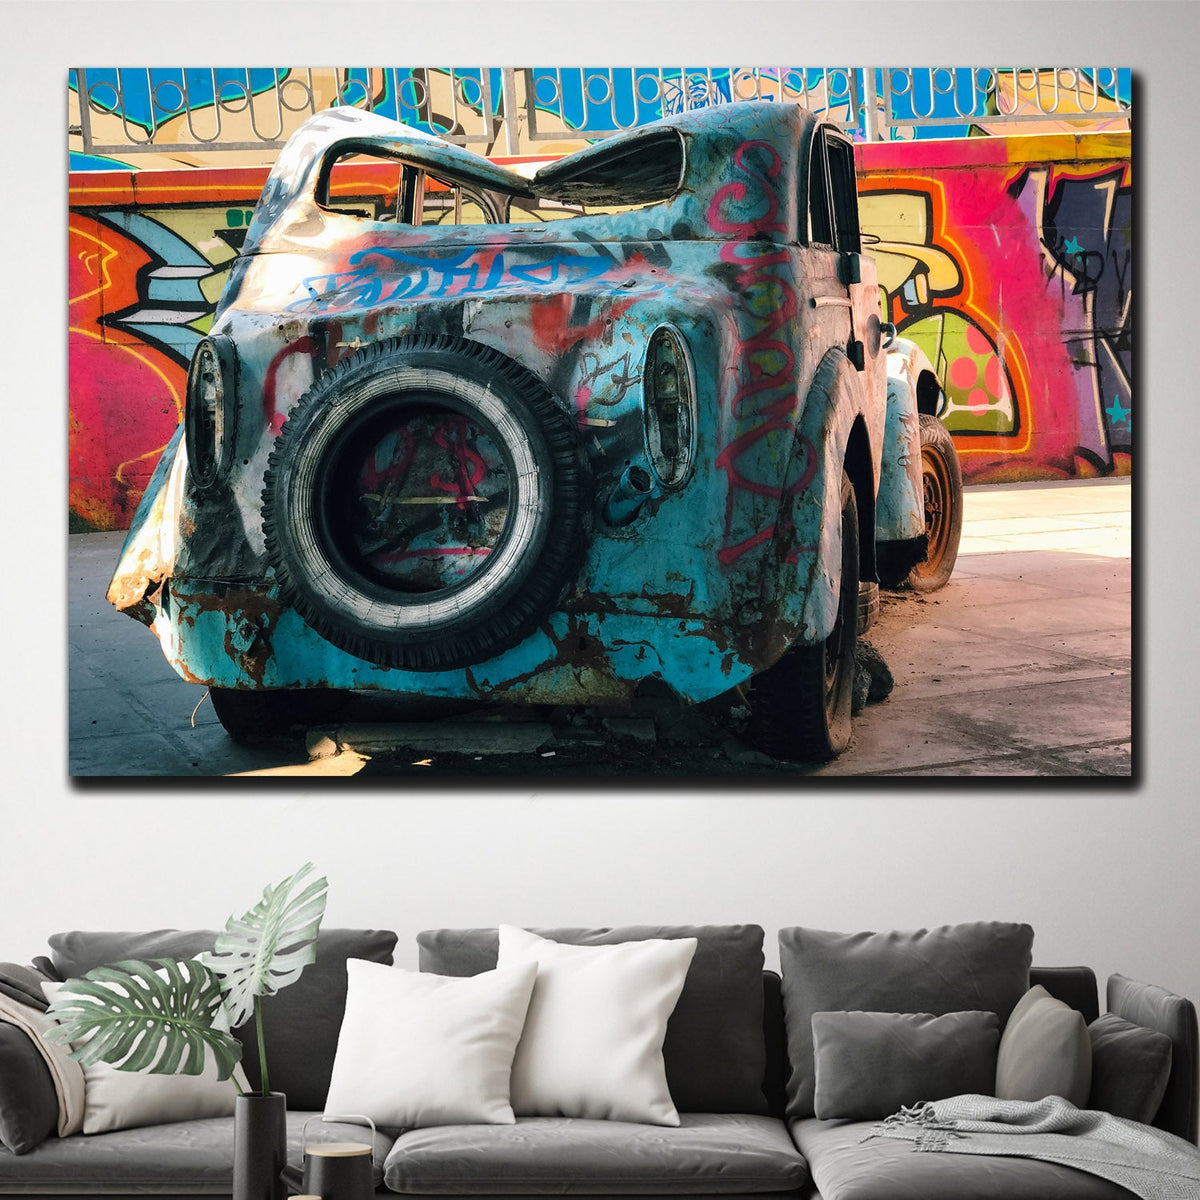 https://cdn.shopify.com/s/files/1/0387/9986/8044/products/OldStreetCarCanvasArtprintStretched-4.jpg